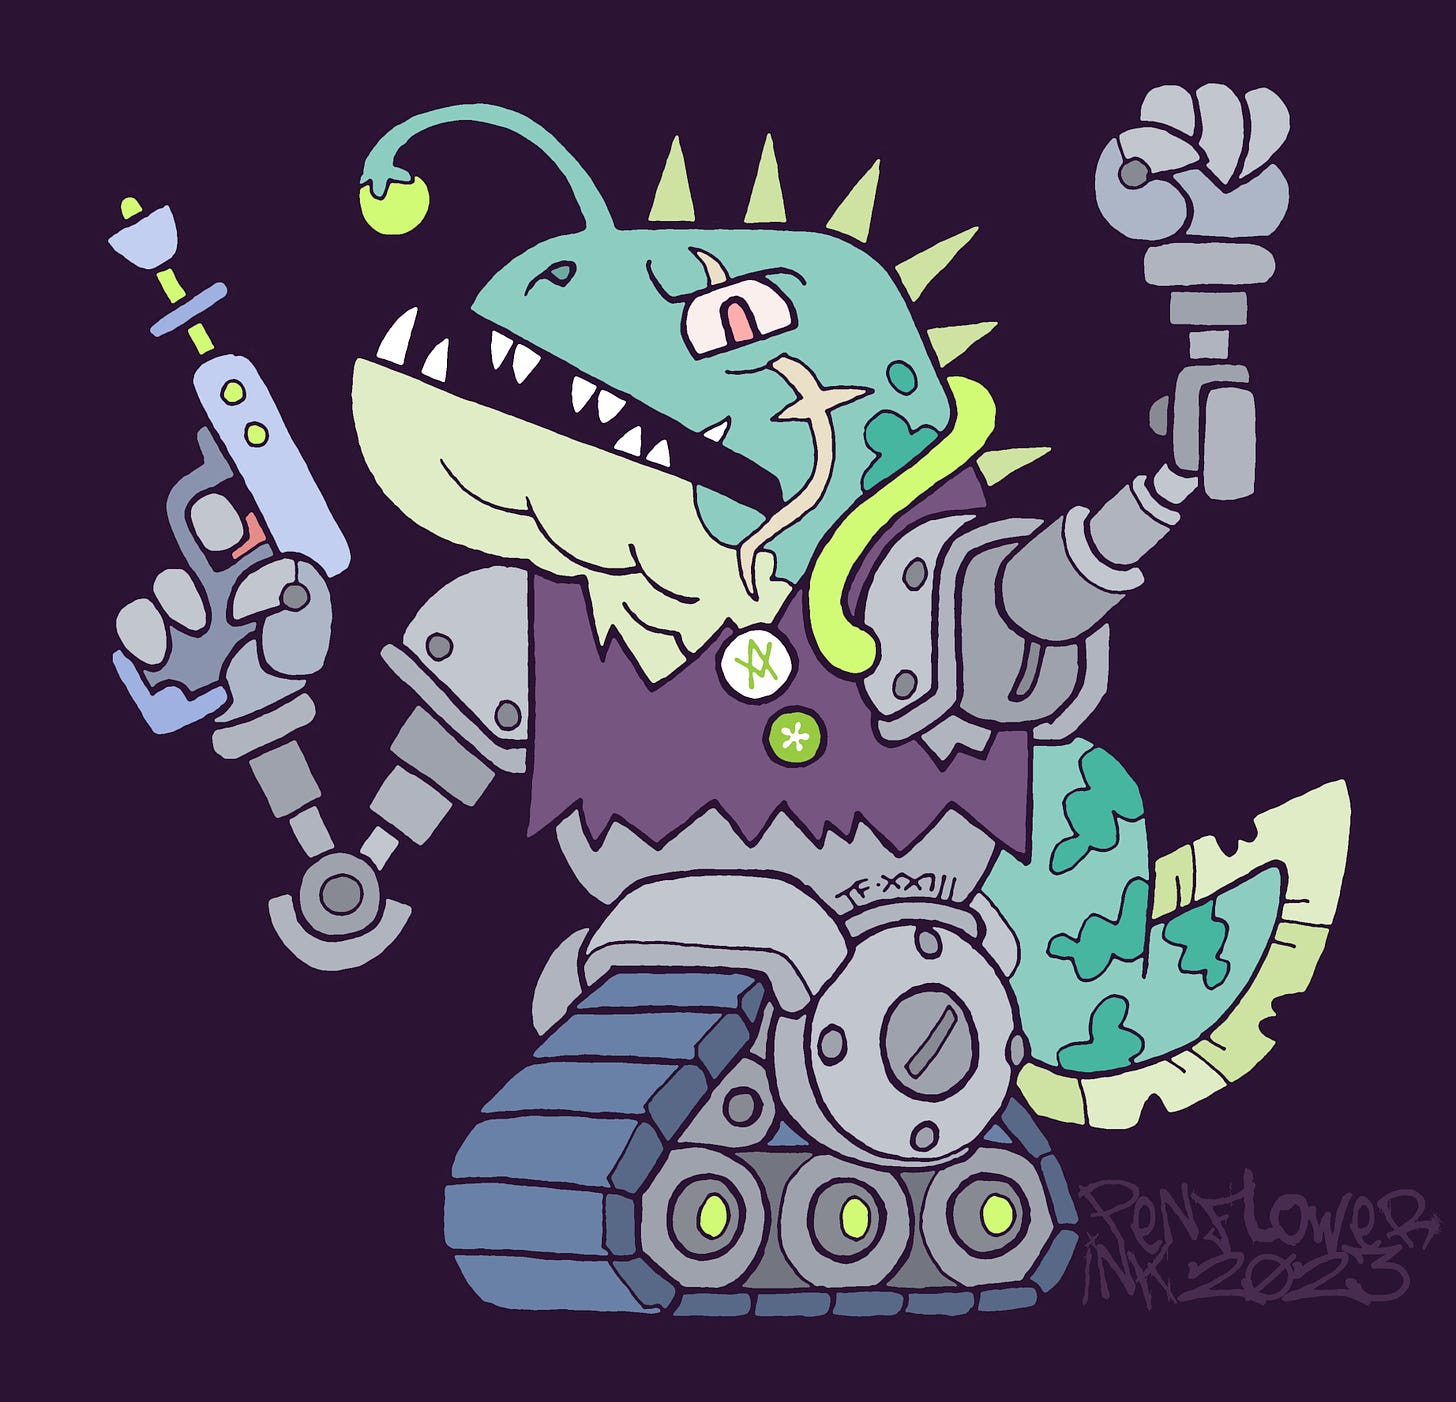 Traditionally hand drawn and digitally coloured illustration of an alien cyborg revolutionary. They have an eel-like body, combined with mechanical arms and tank-like treads. They are wearing a couple of pins on a torn dark vest, holding a laser pistol in their right hand and raising their left fist in the air.